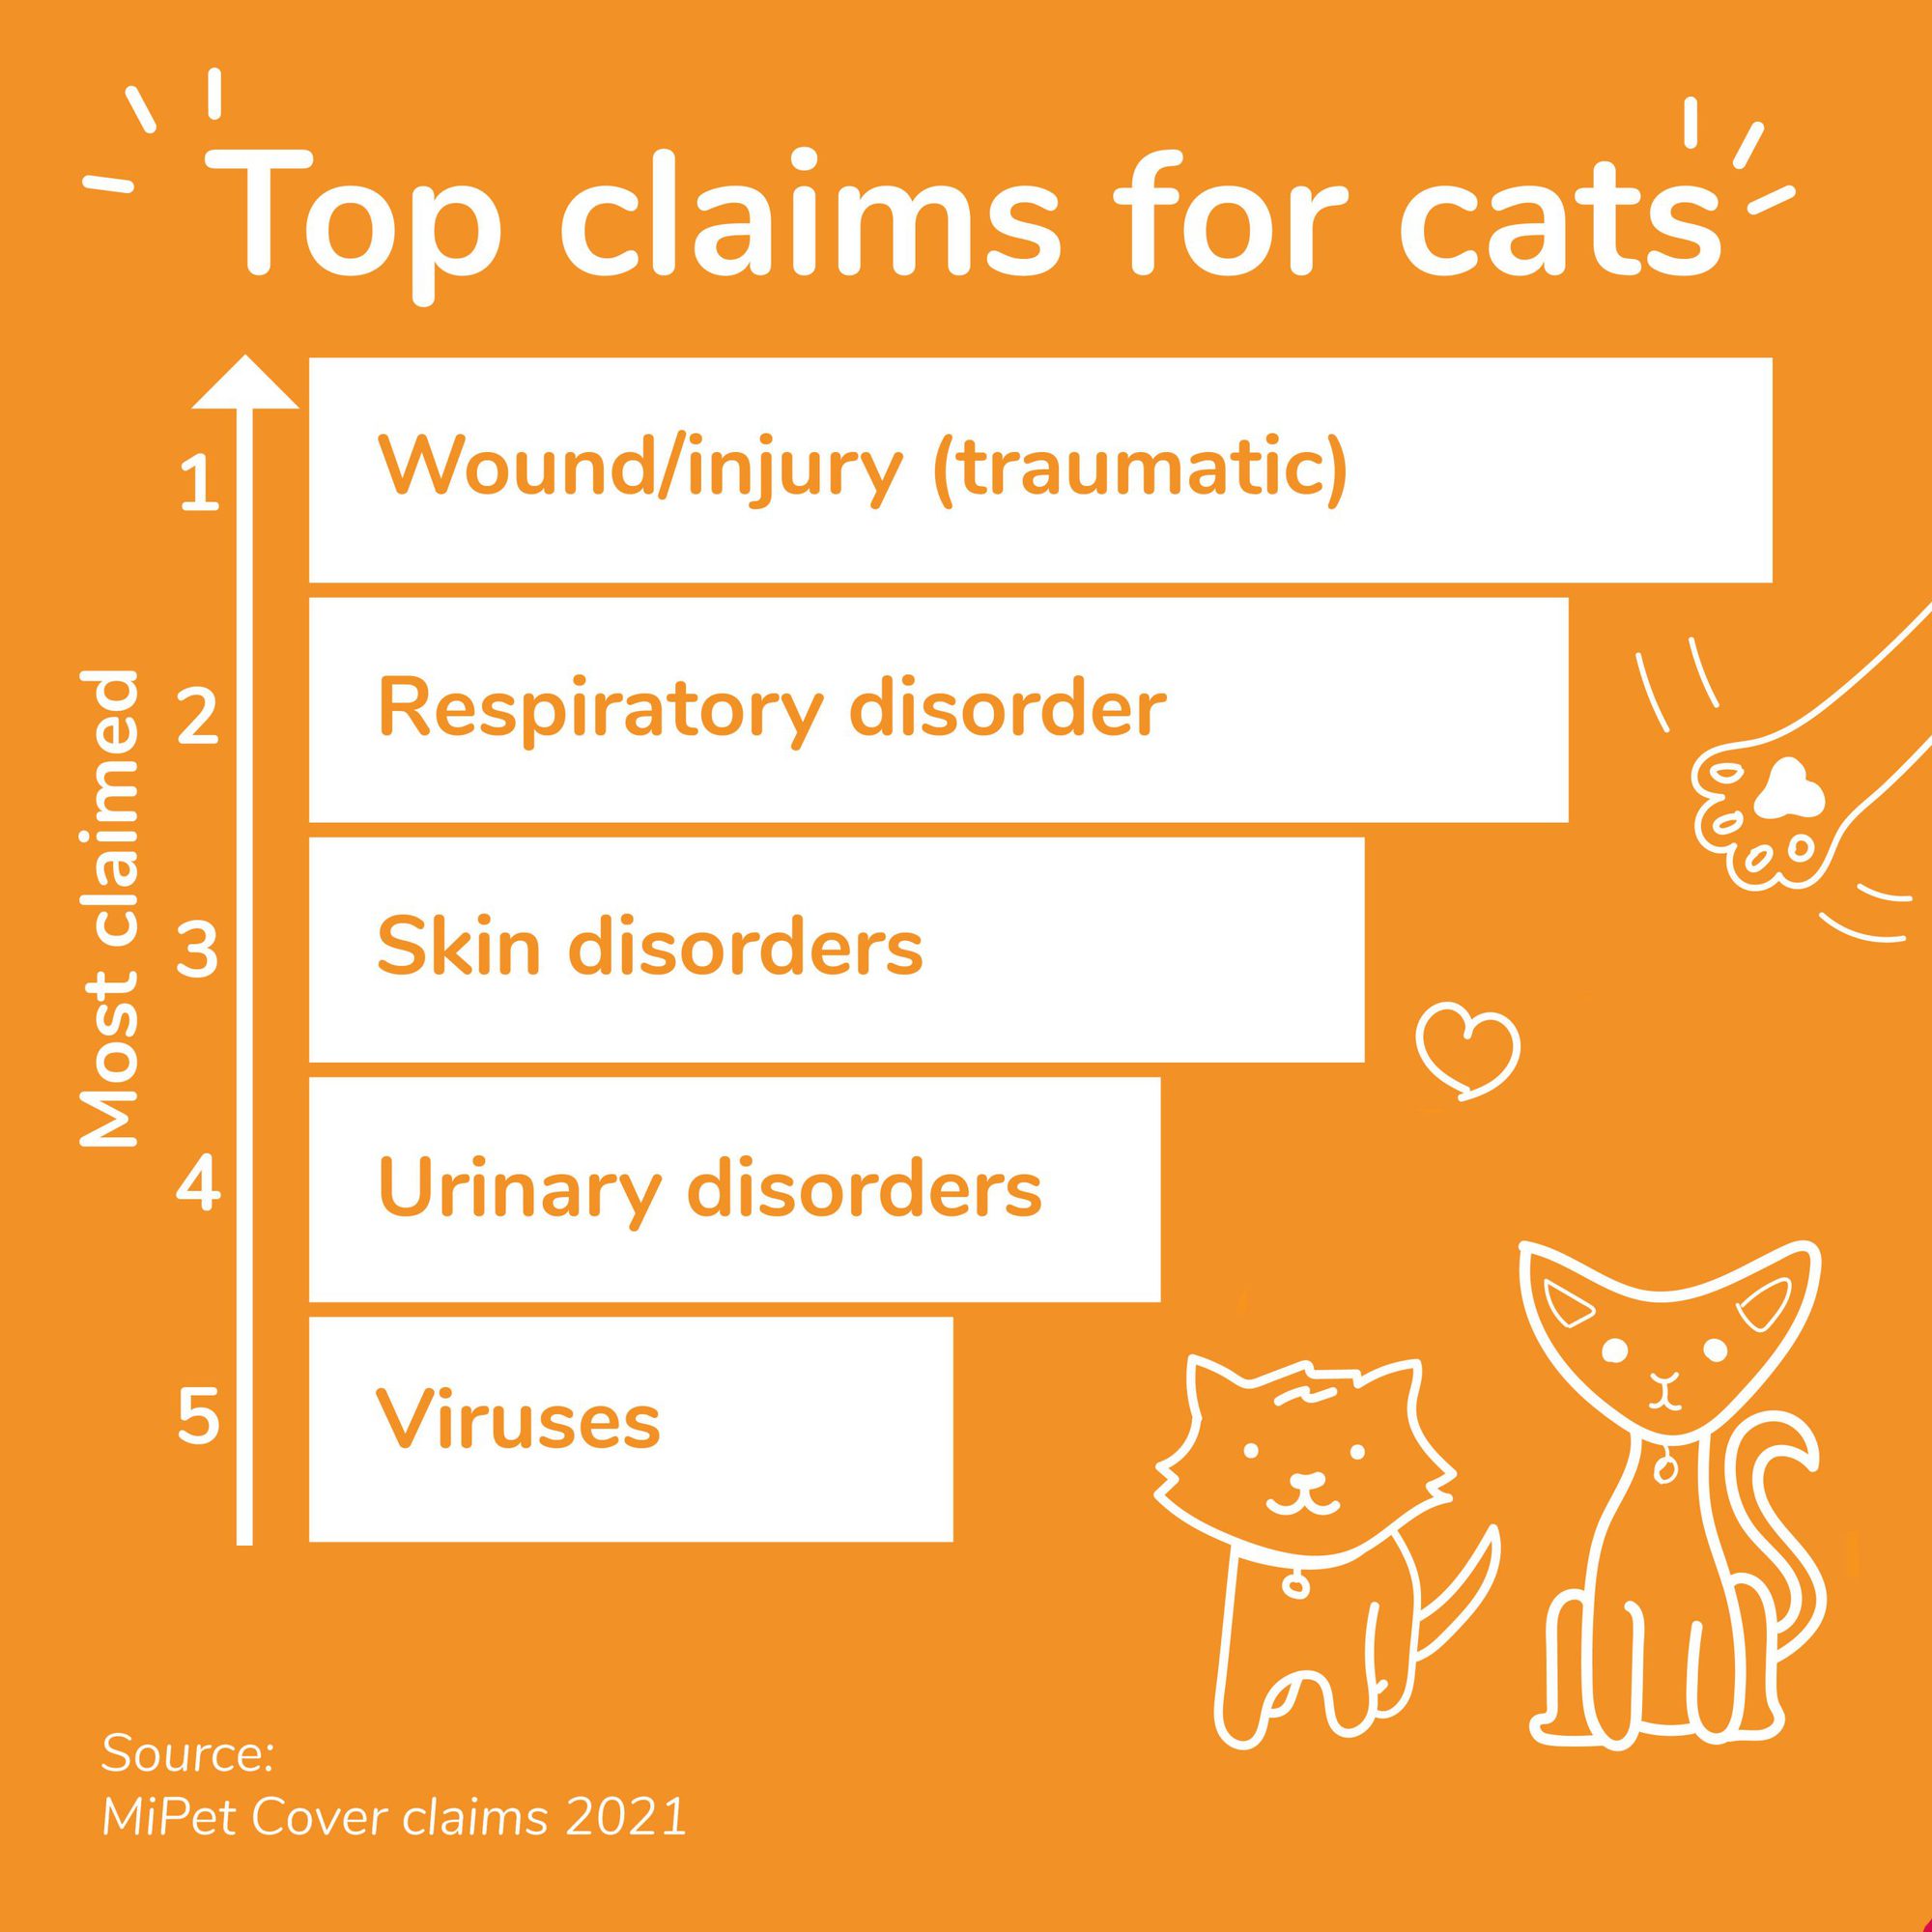 The top five pet insurance claims for cats